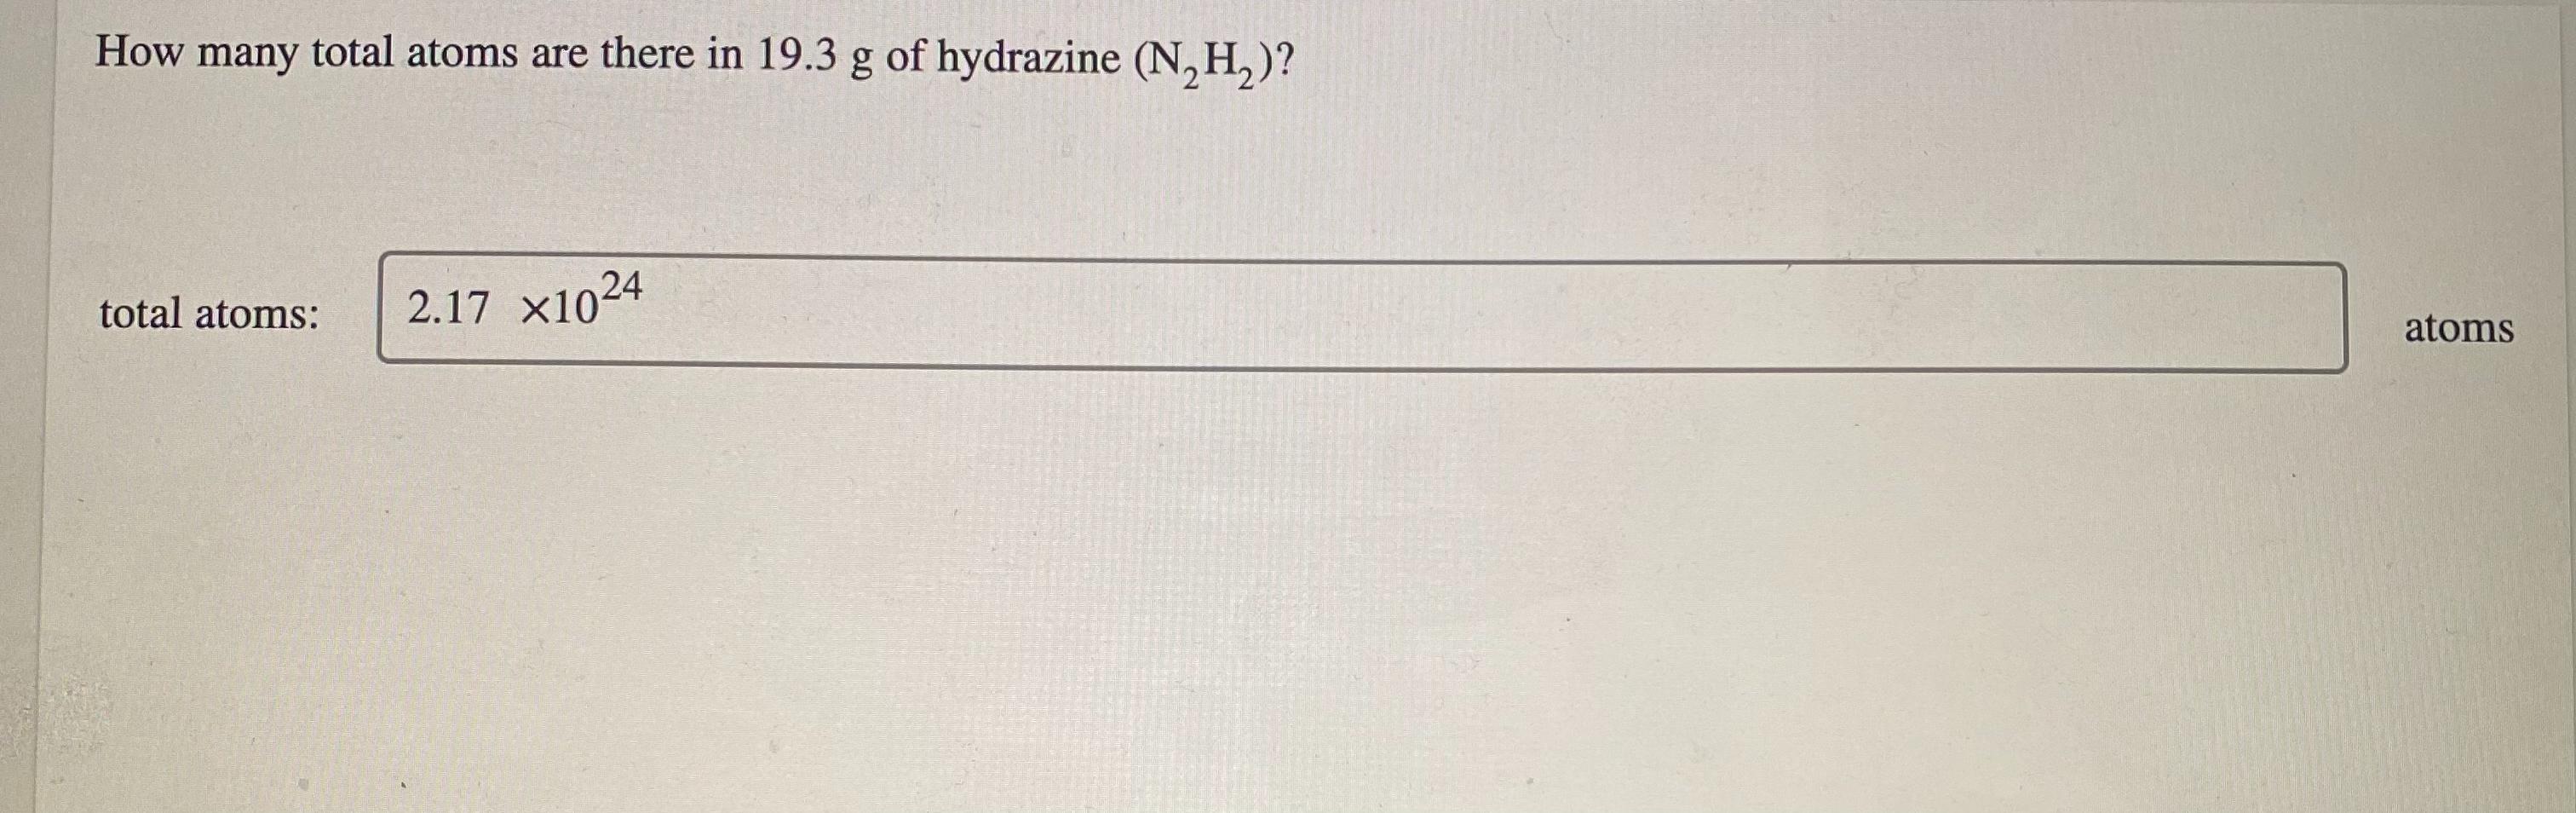 How Many Total Atoms Are There In 19.3 G Of Hydrazine (N_{2}*H_{2})